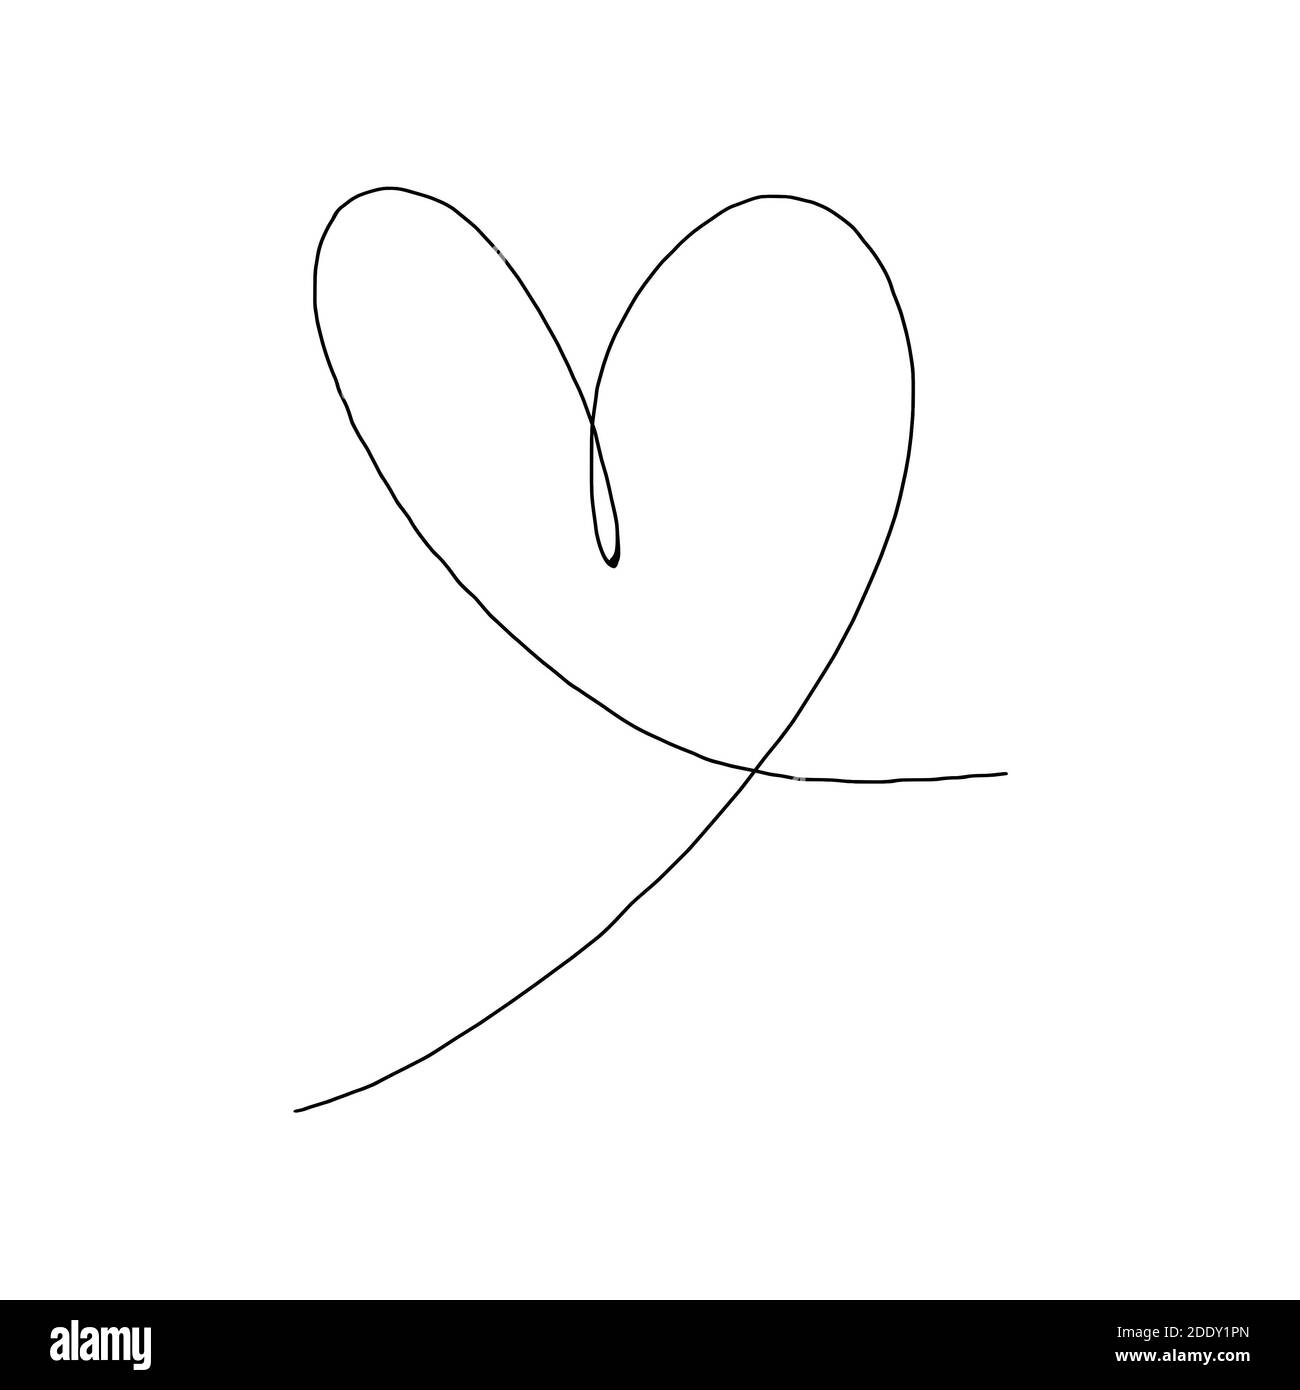 Hand drawn heart with black outline isolated on white background. Continuous line in form of heart. One line drawing. Template for t-shirt, poster, ba Stock Photo